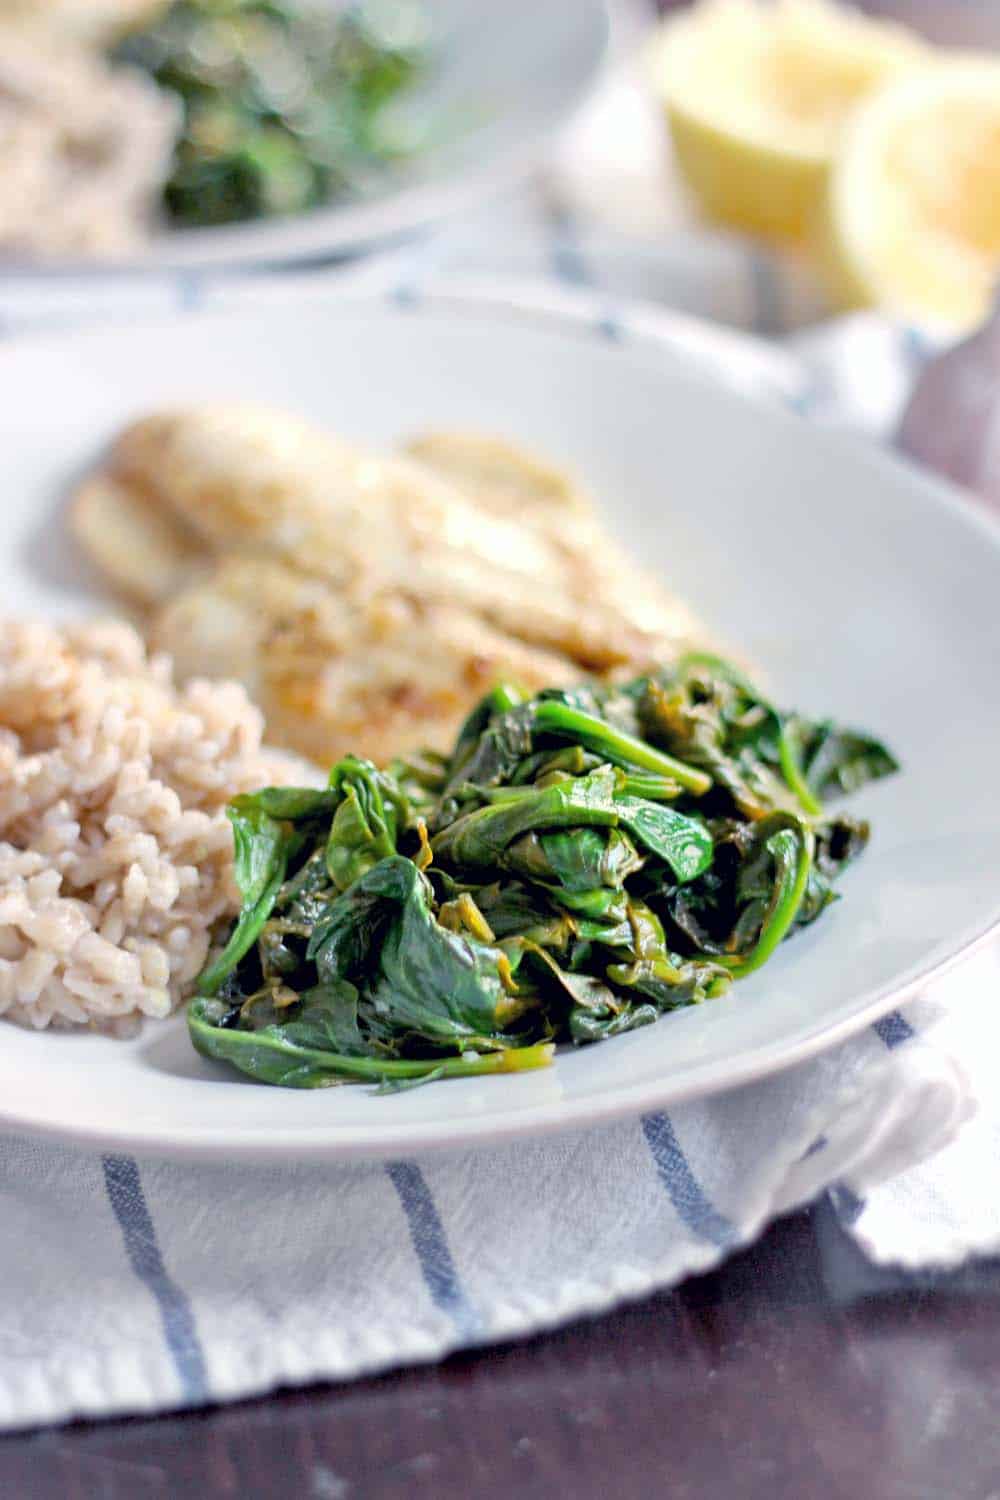 5-Minute Sauteed Spinach with Garlic and Lemon | The BEST and FASTEST way to use up almost wilted spinach... or any other greens! Bright and savory with lemon and garlic flavors- the perfect side to almost any meal.